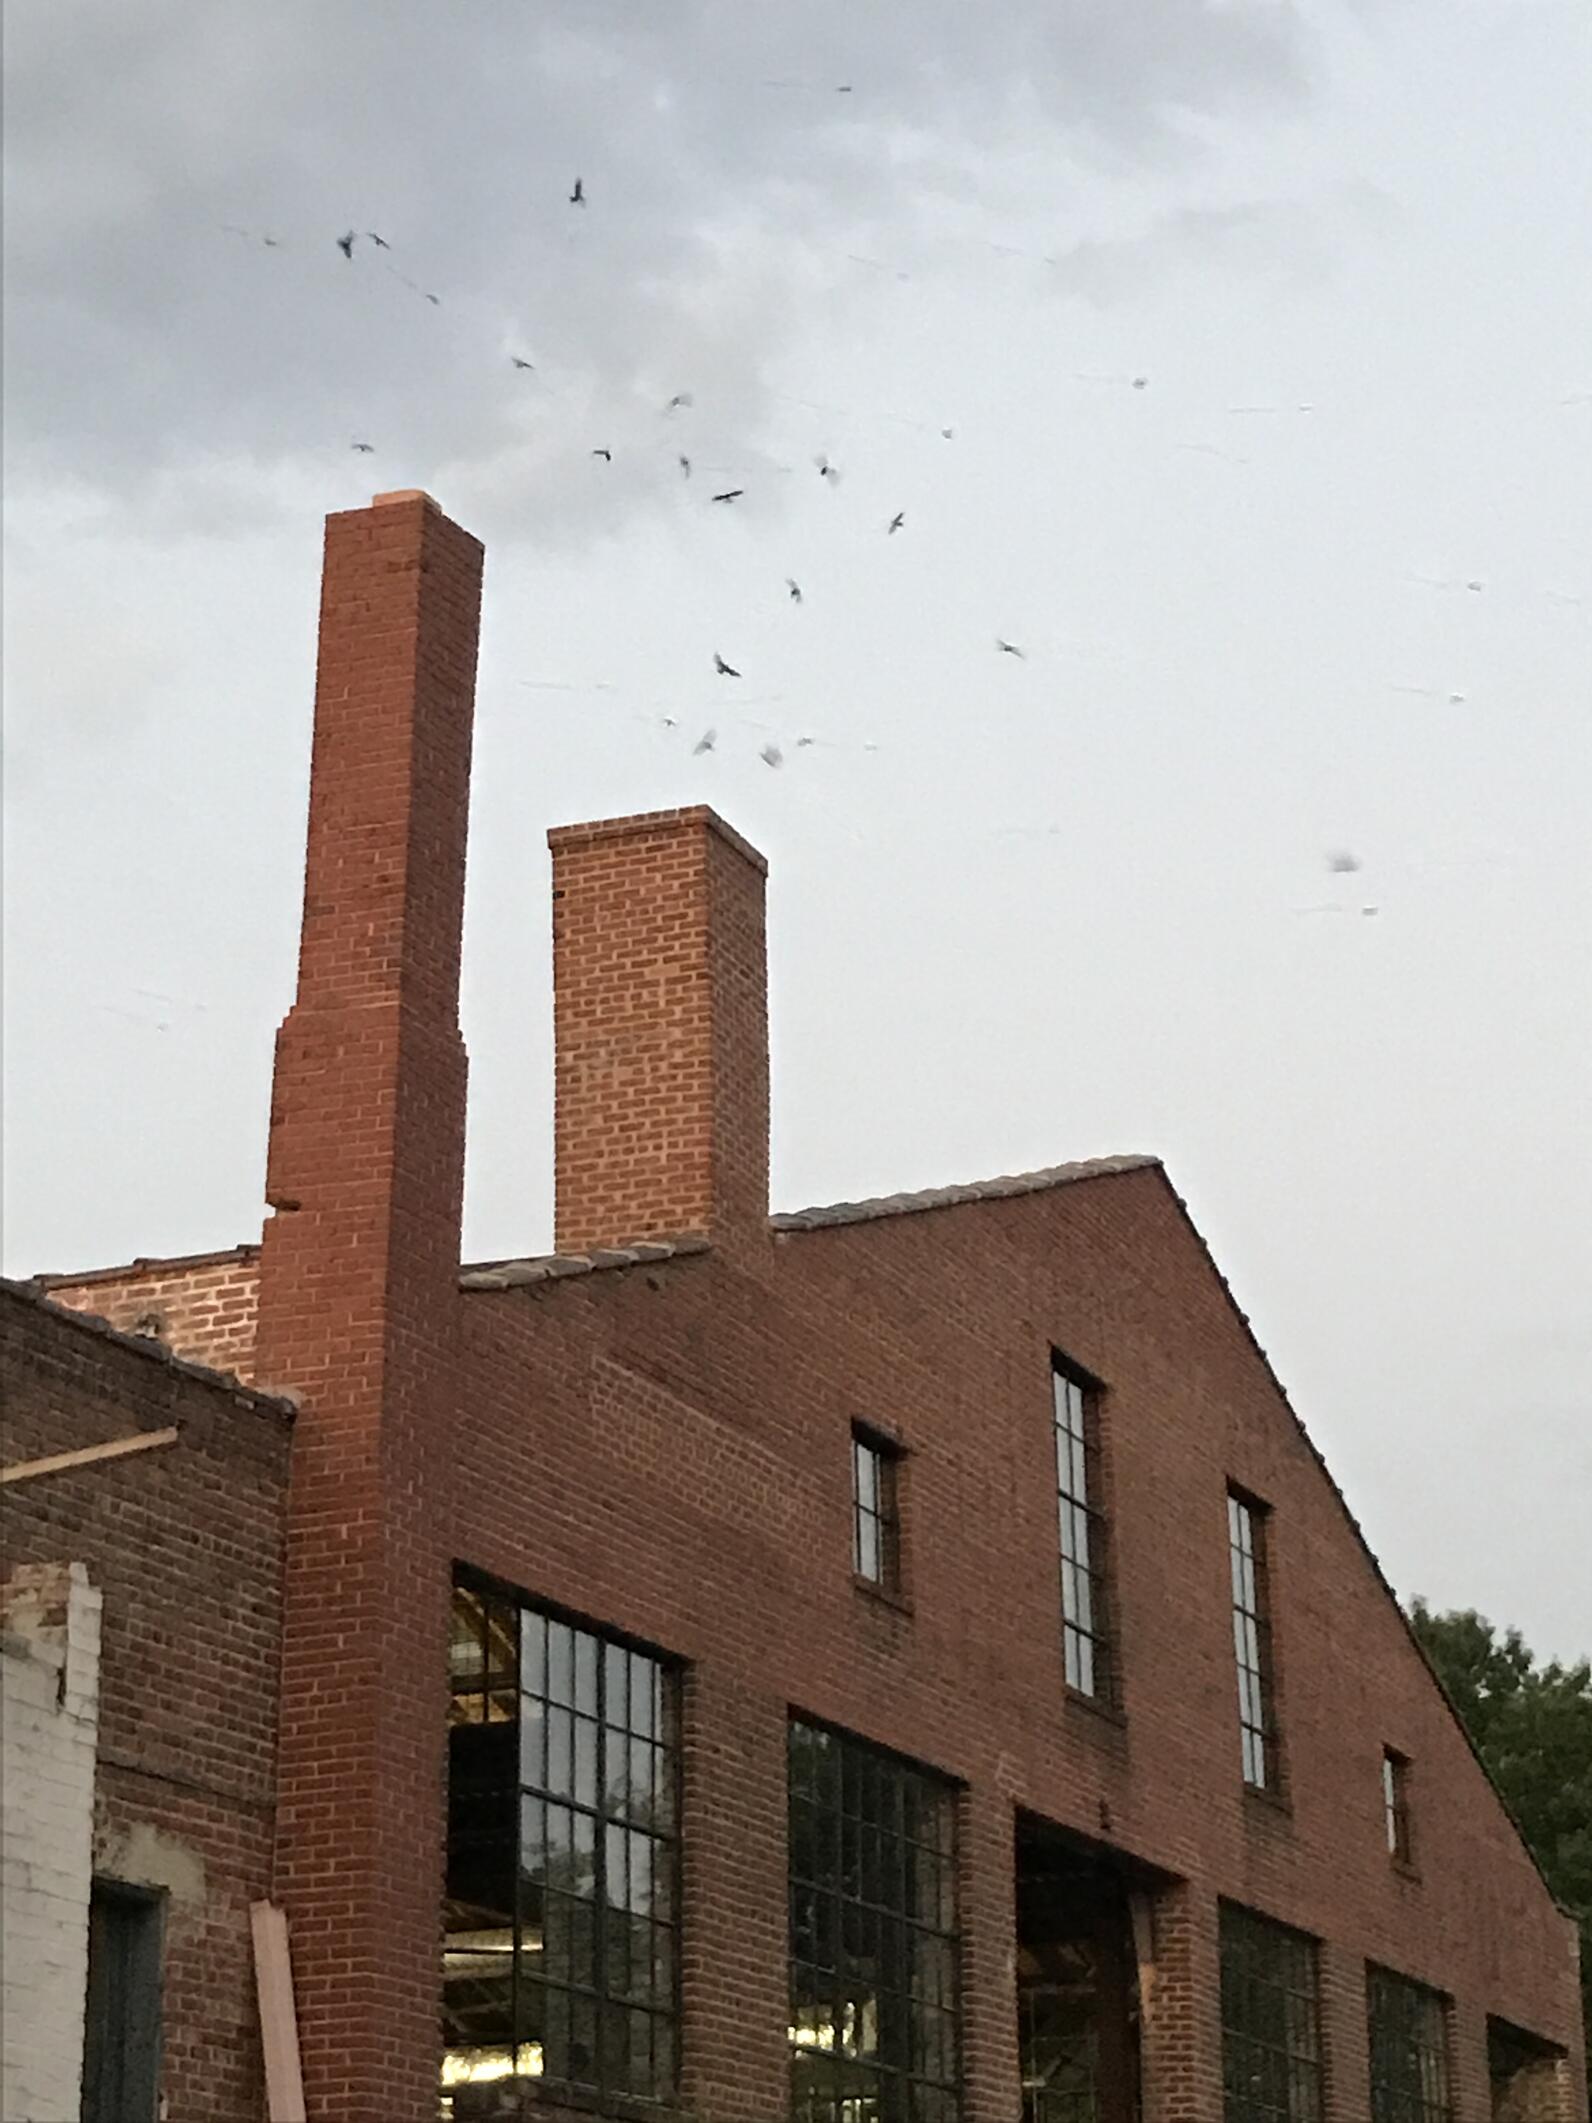 Chimney Swifts flying into the Transfer company food hall chimney